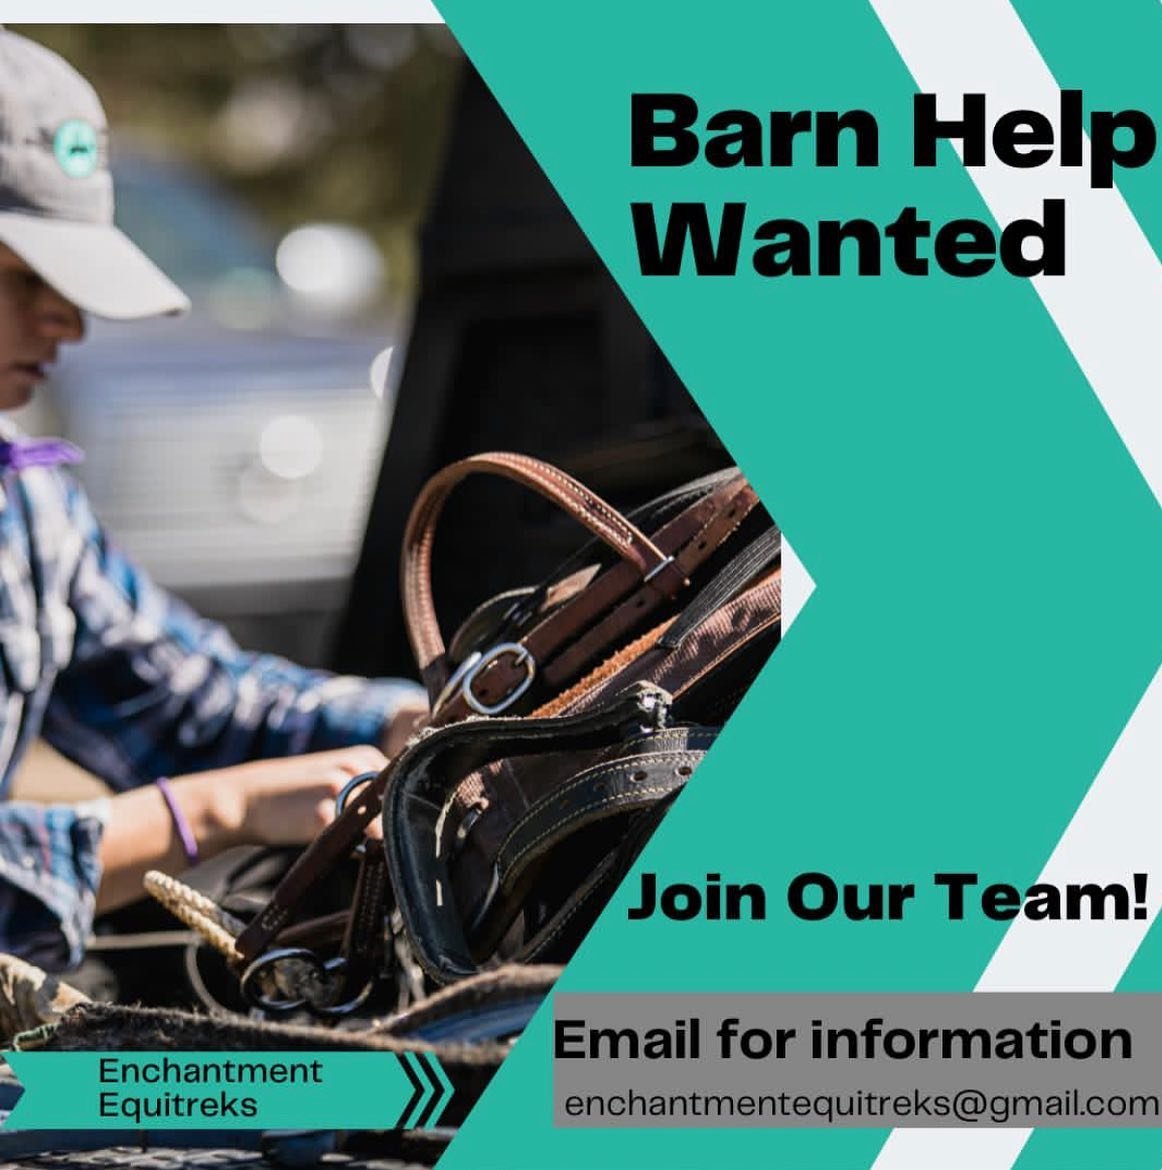 Weekend barn help needed! 

Enchantment Equitreks is looking for a reliable and enthusiastic person to join our team at a small horseback riding vacation ranch.

* Friday-Sunday 
* 6 hrs of work (about 4 hrs am and 2 pm) 
* Feeding, mucking, and gene